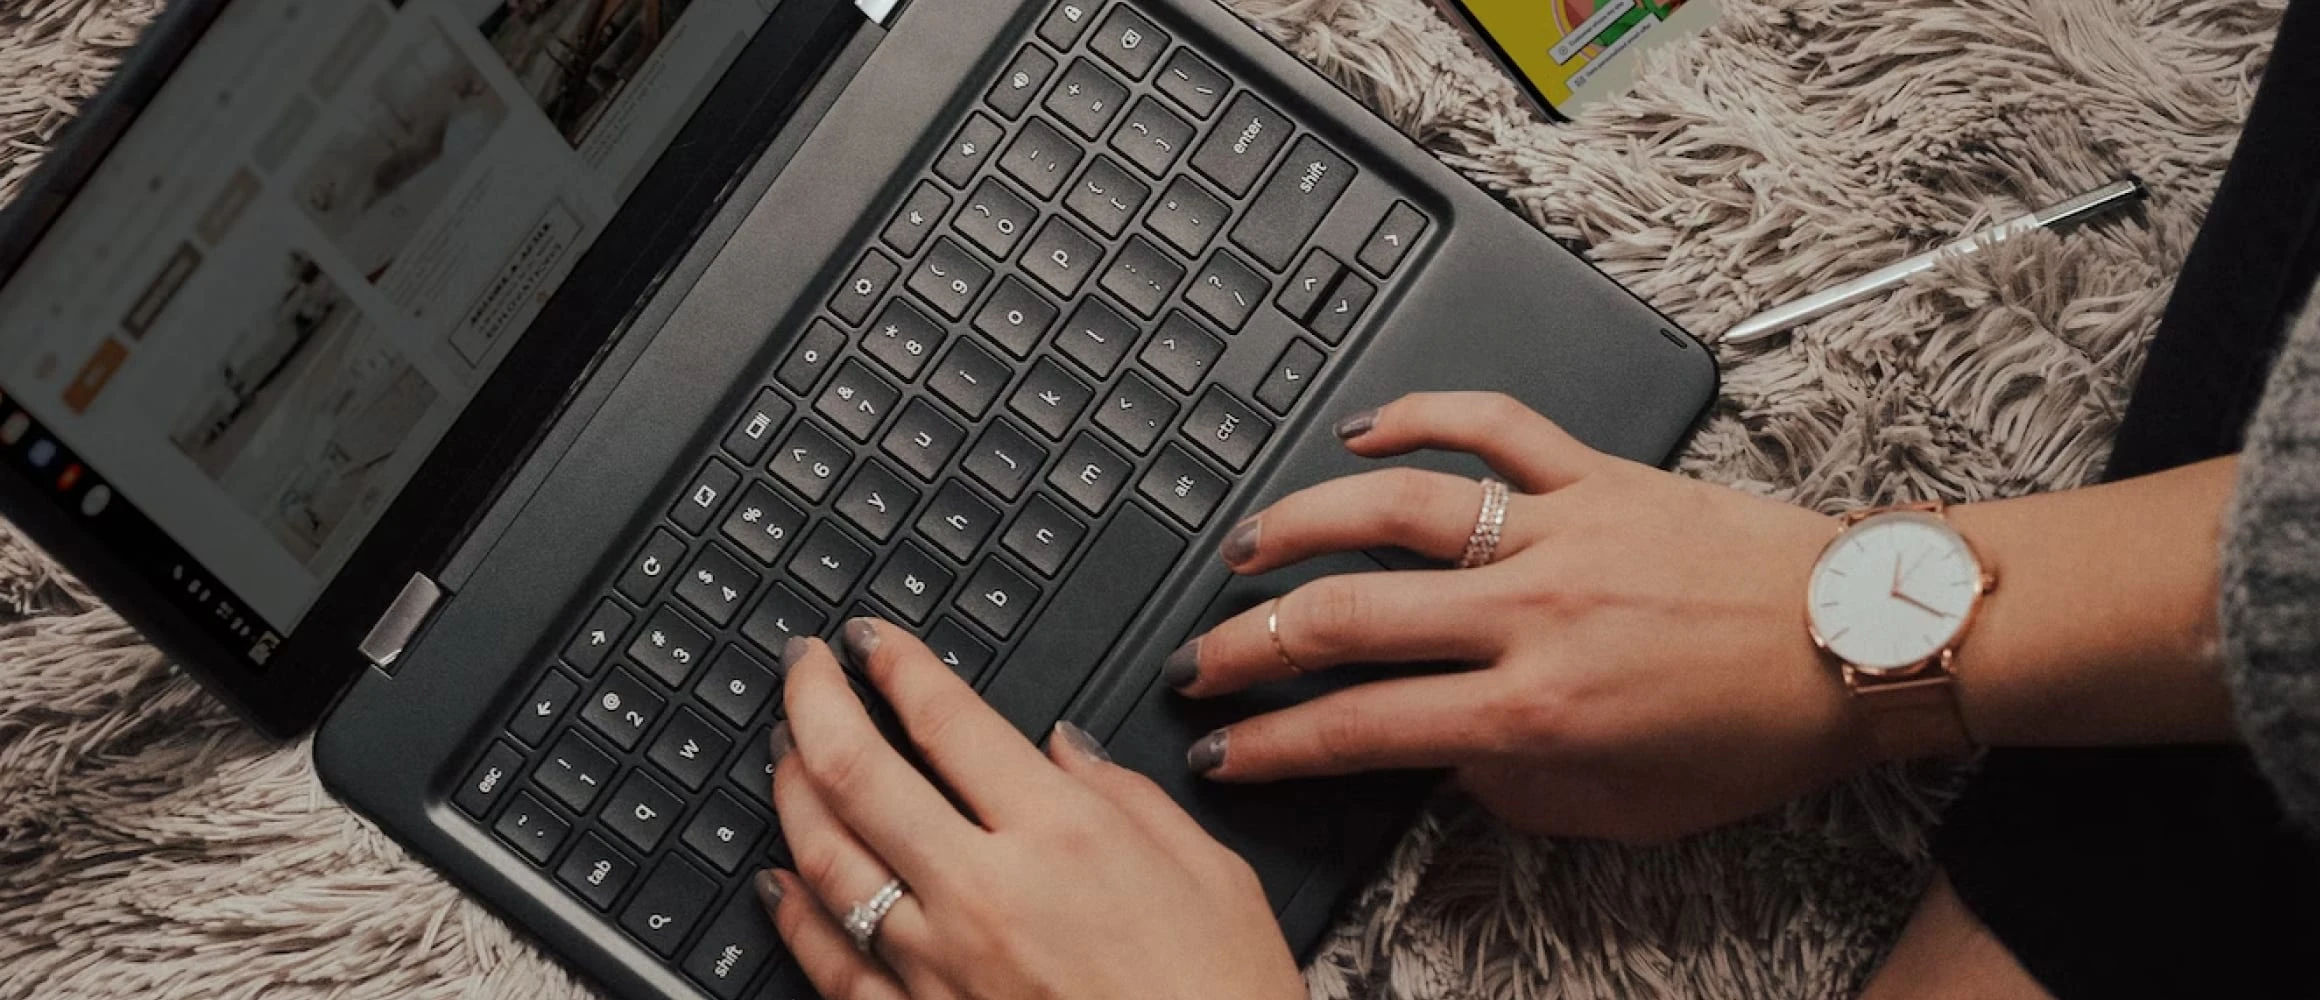 A woman creating a wedding website on her laptop